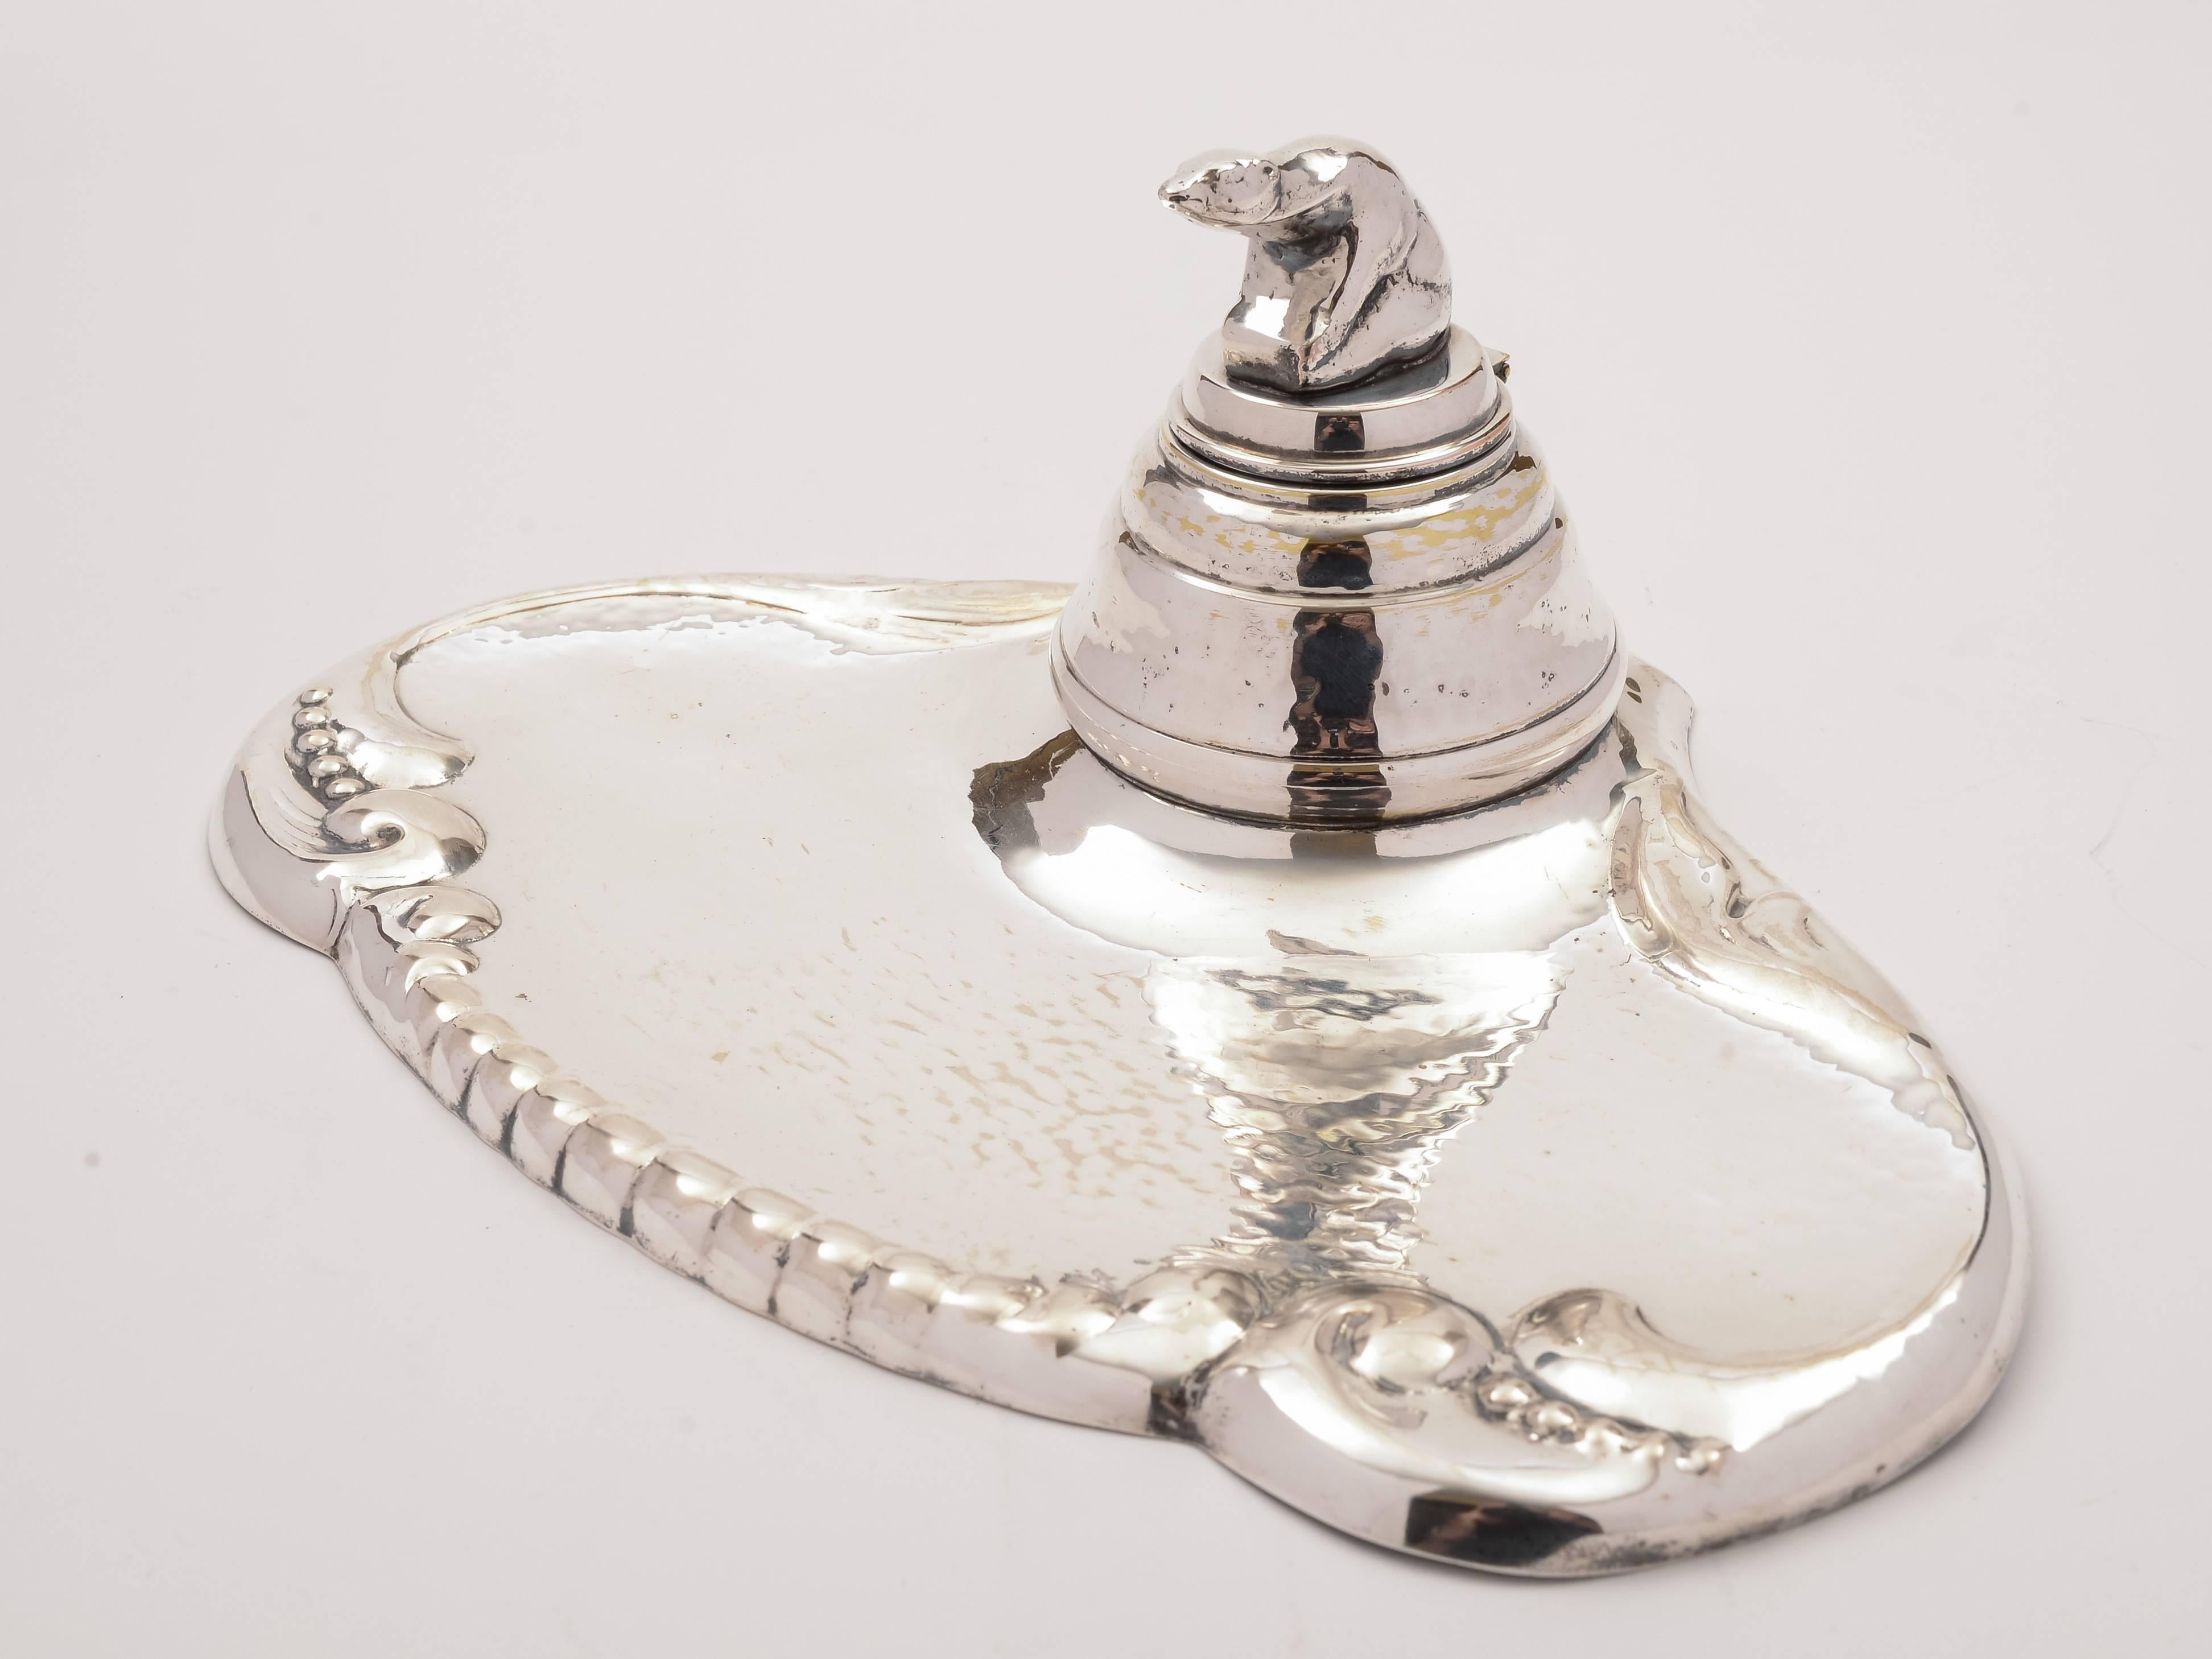 A lovely Nordic 20th century silver plated ink stand with polar bear finial to ink pot and embossed and hammered decoration to tray and internal removable glass liner, circa 1930.

Free worldwide delivery.

Measurements: 
Height: 4